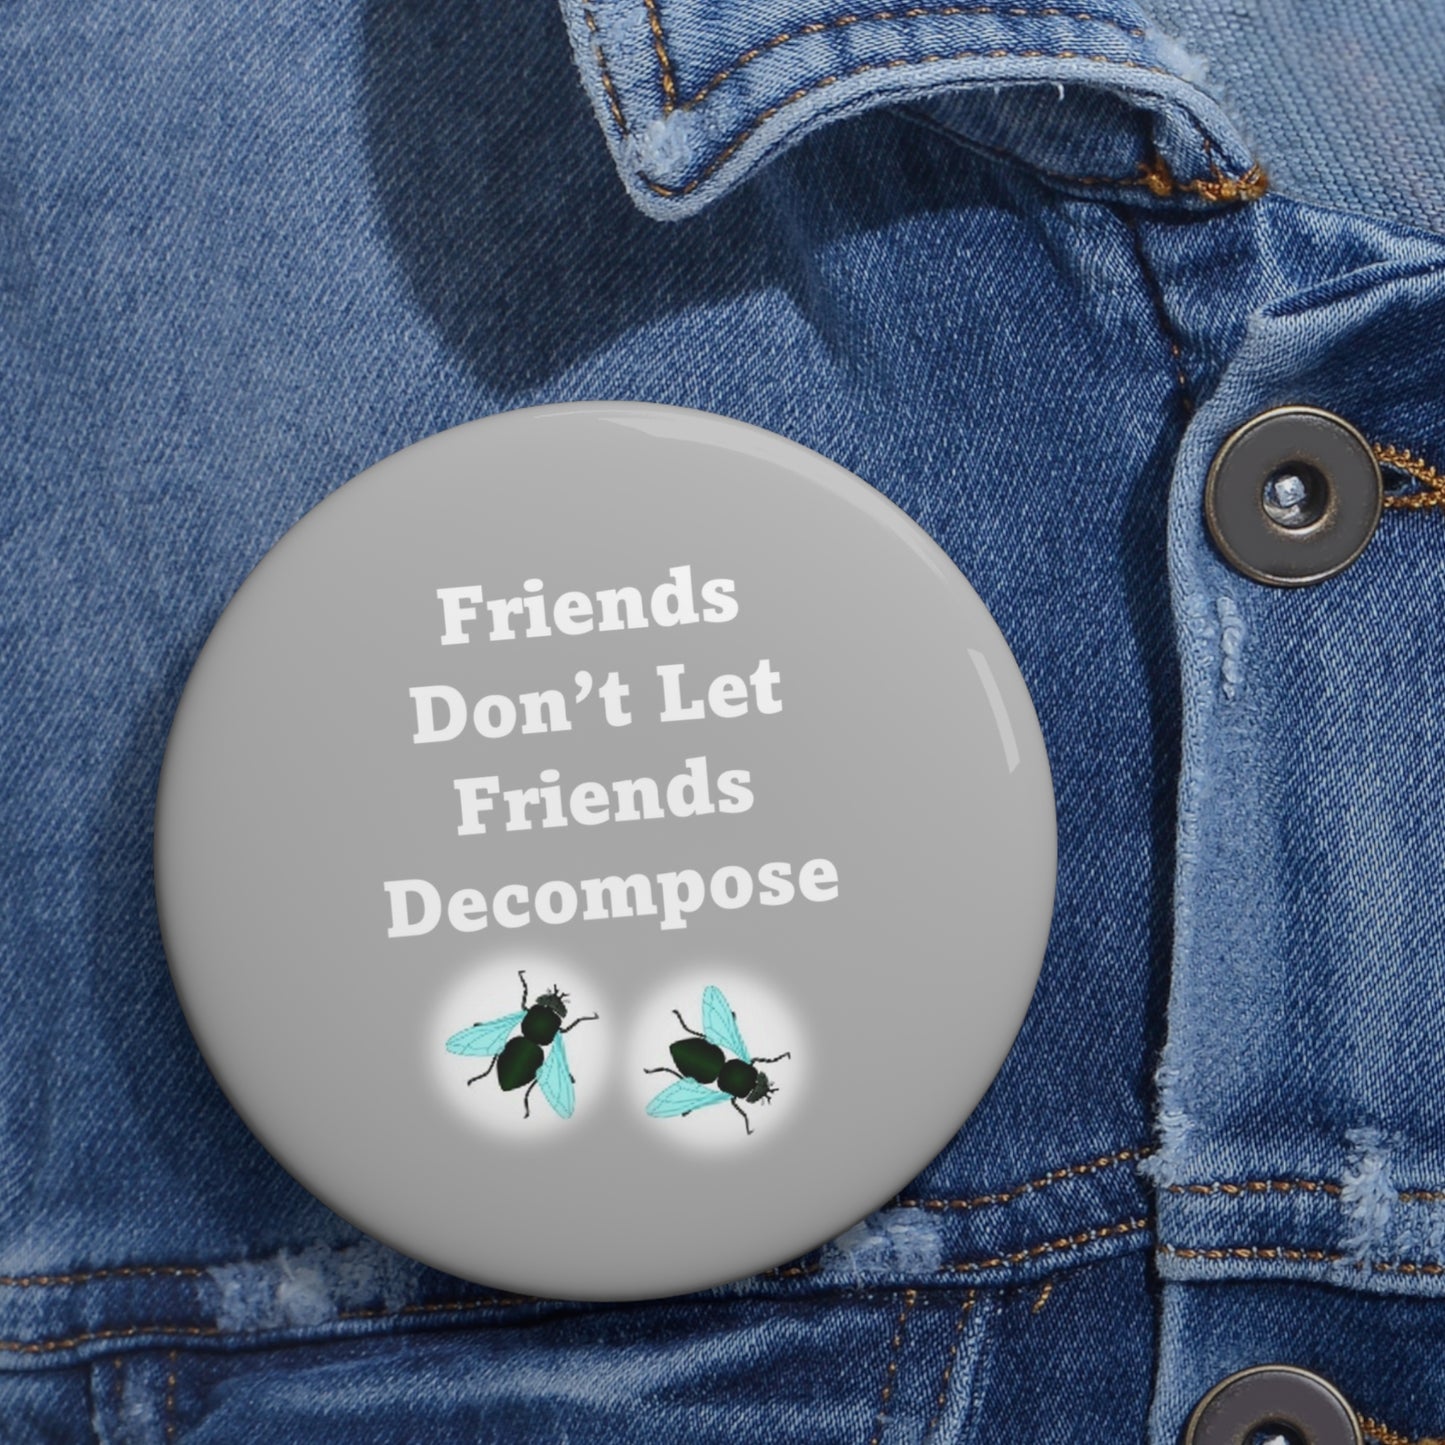 Friends Don't Let Friends Decompose - Gray - Custom Pin Buttons